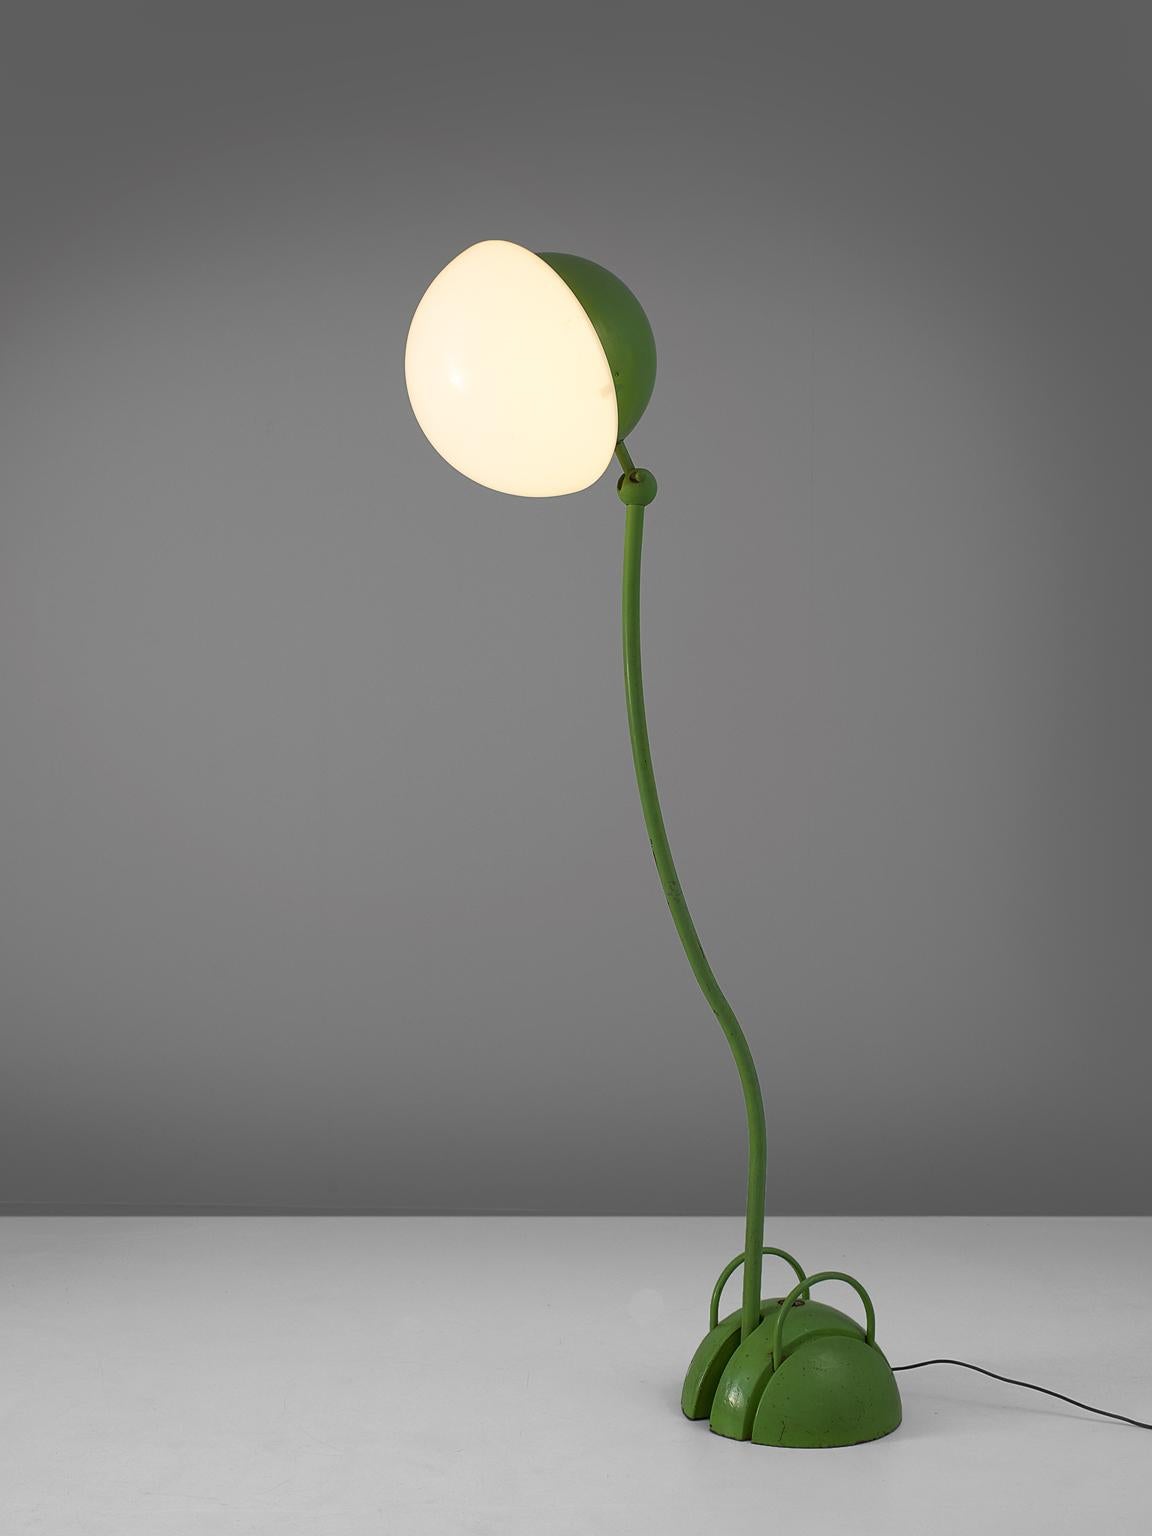 Gae Aulenti for Poltronova, 'Locus Solus' floor lamp, in metal glass, Italy, 1963.

Large green floor lamp designed by Gae Aulenti. The lamp features a large bulb, which is hold up by a lime green organic shaped frame. Very simplistic, yet playful